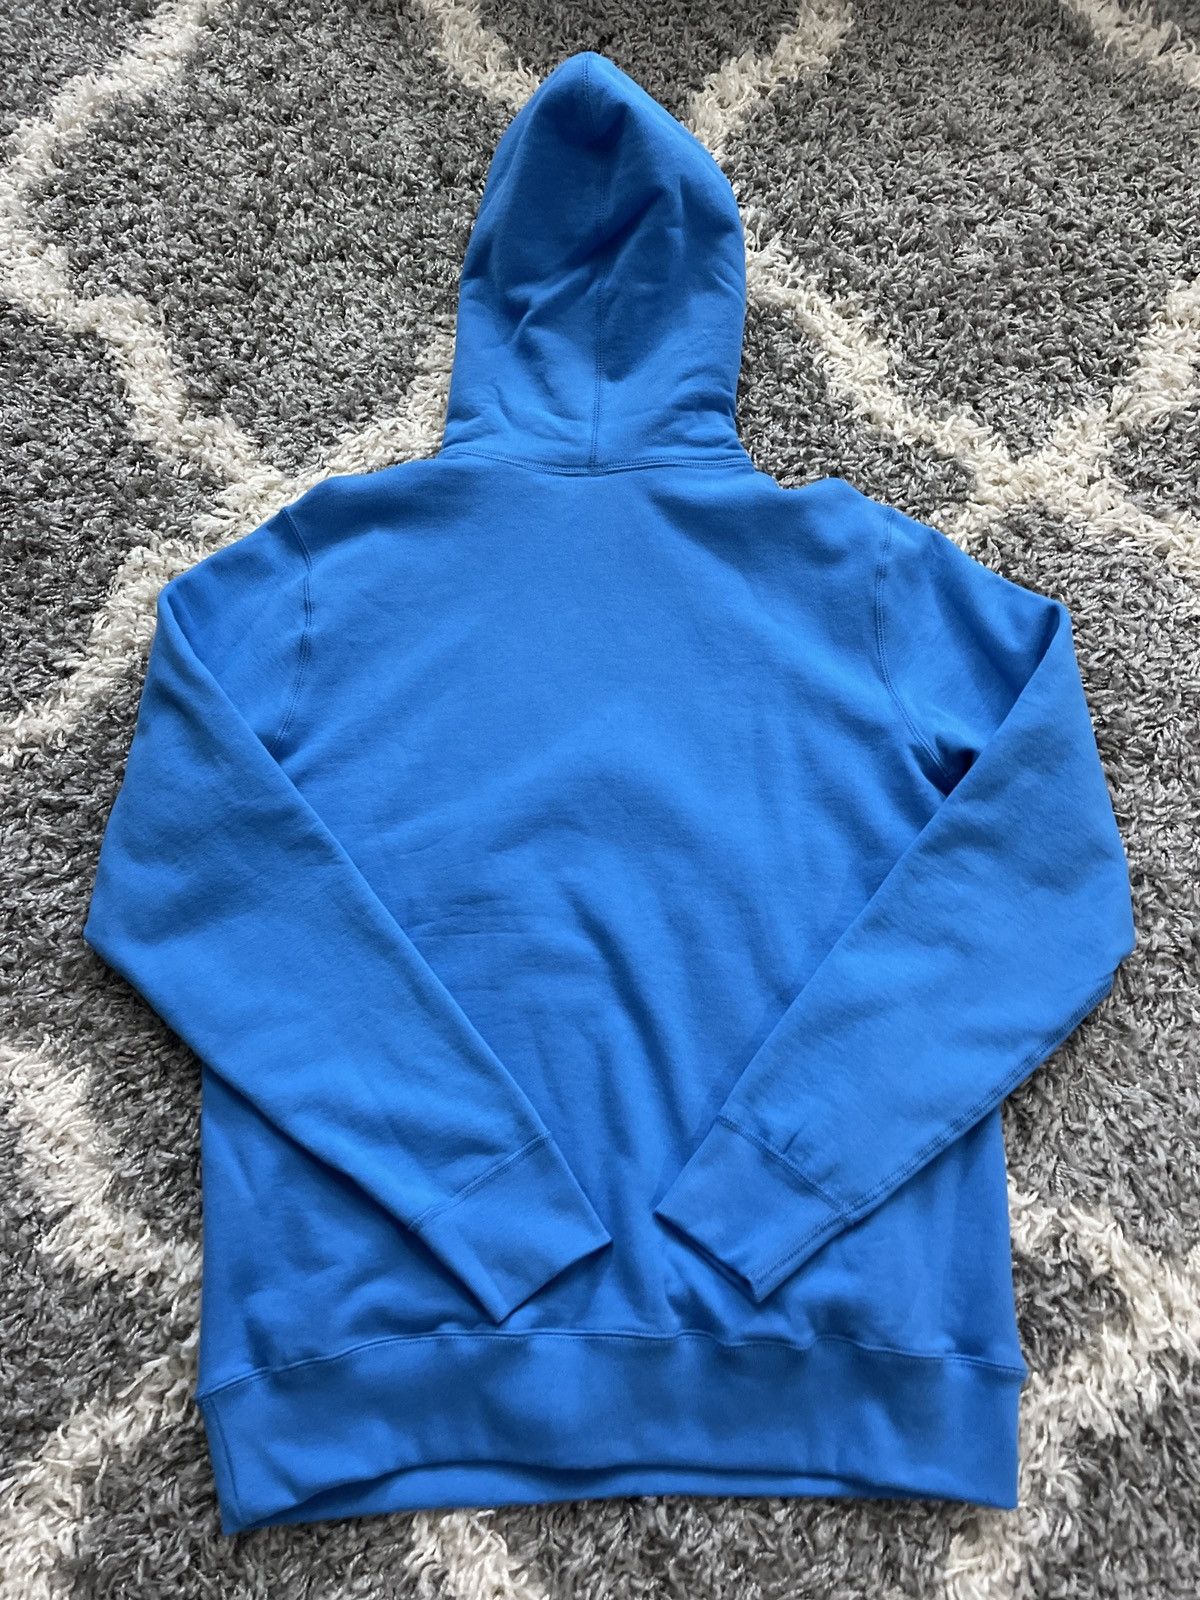 Octobers Very Own OVO Classic Owl Hoodie Bright Blue Sz L Preowned Size US L / EU 52-54 / 3 - 5 Thumbnail